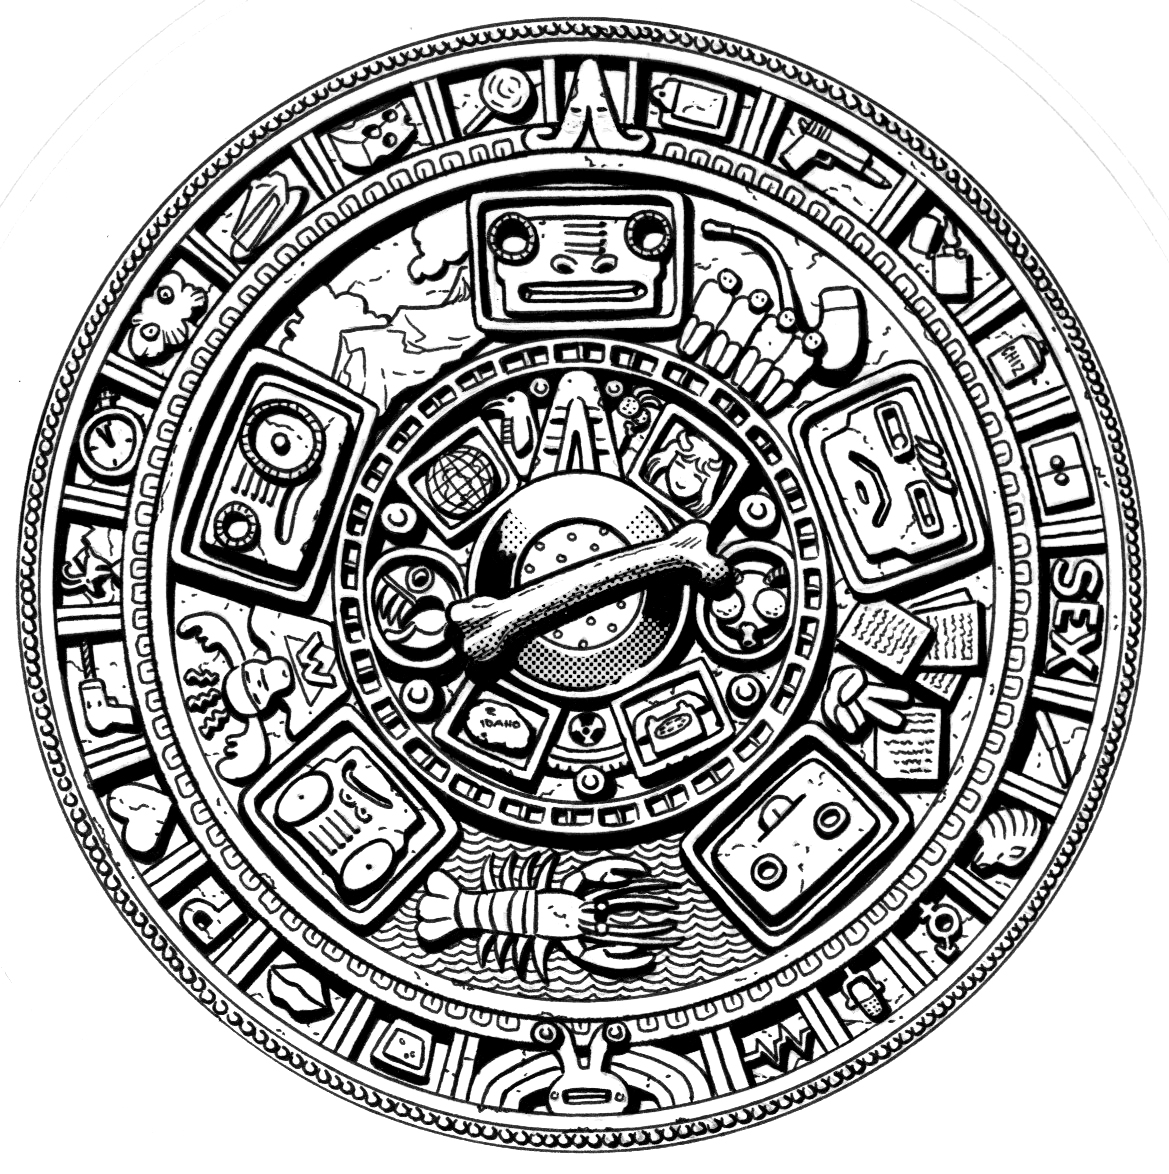 Mayan Calendar Sketch at PaintingValley com Explore collection of